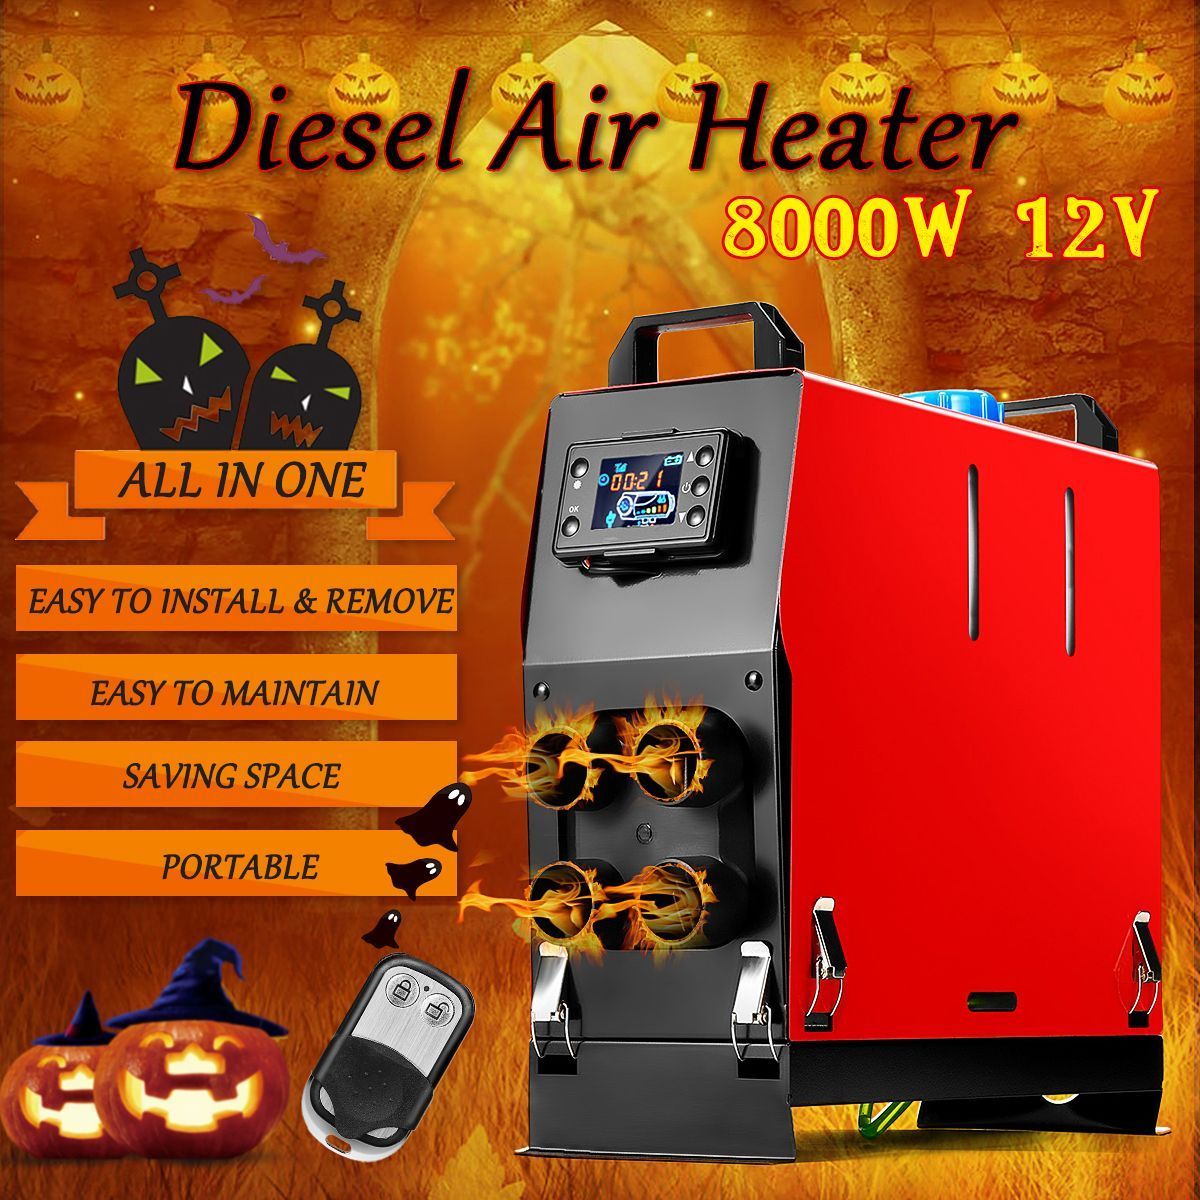 12V-8000W-Diesel-Air-Heater-All-in-One-Fuel-Air-Parking-Warmer-with-LCD-Switch-Remote-For-Bus-Truck--1368620